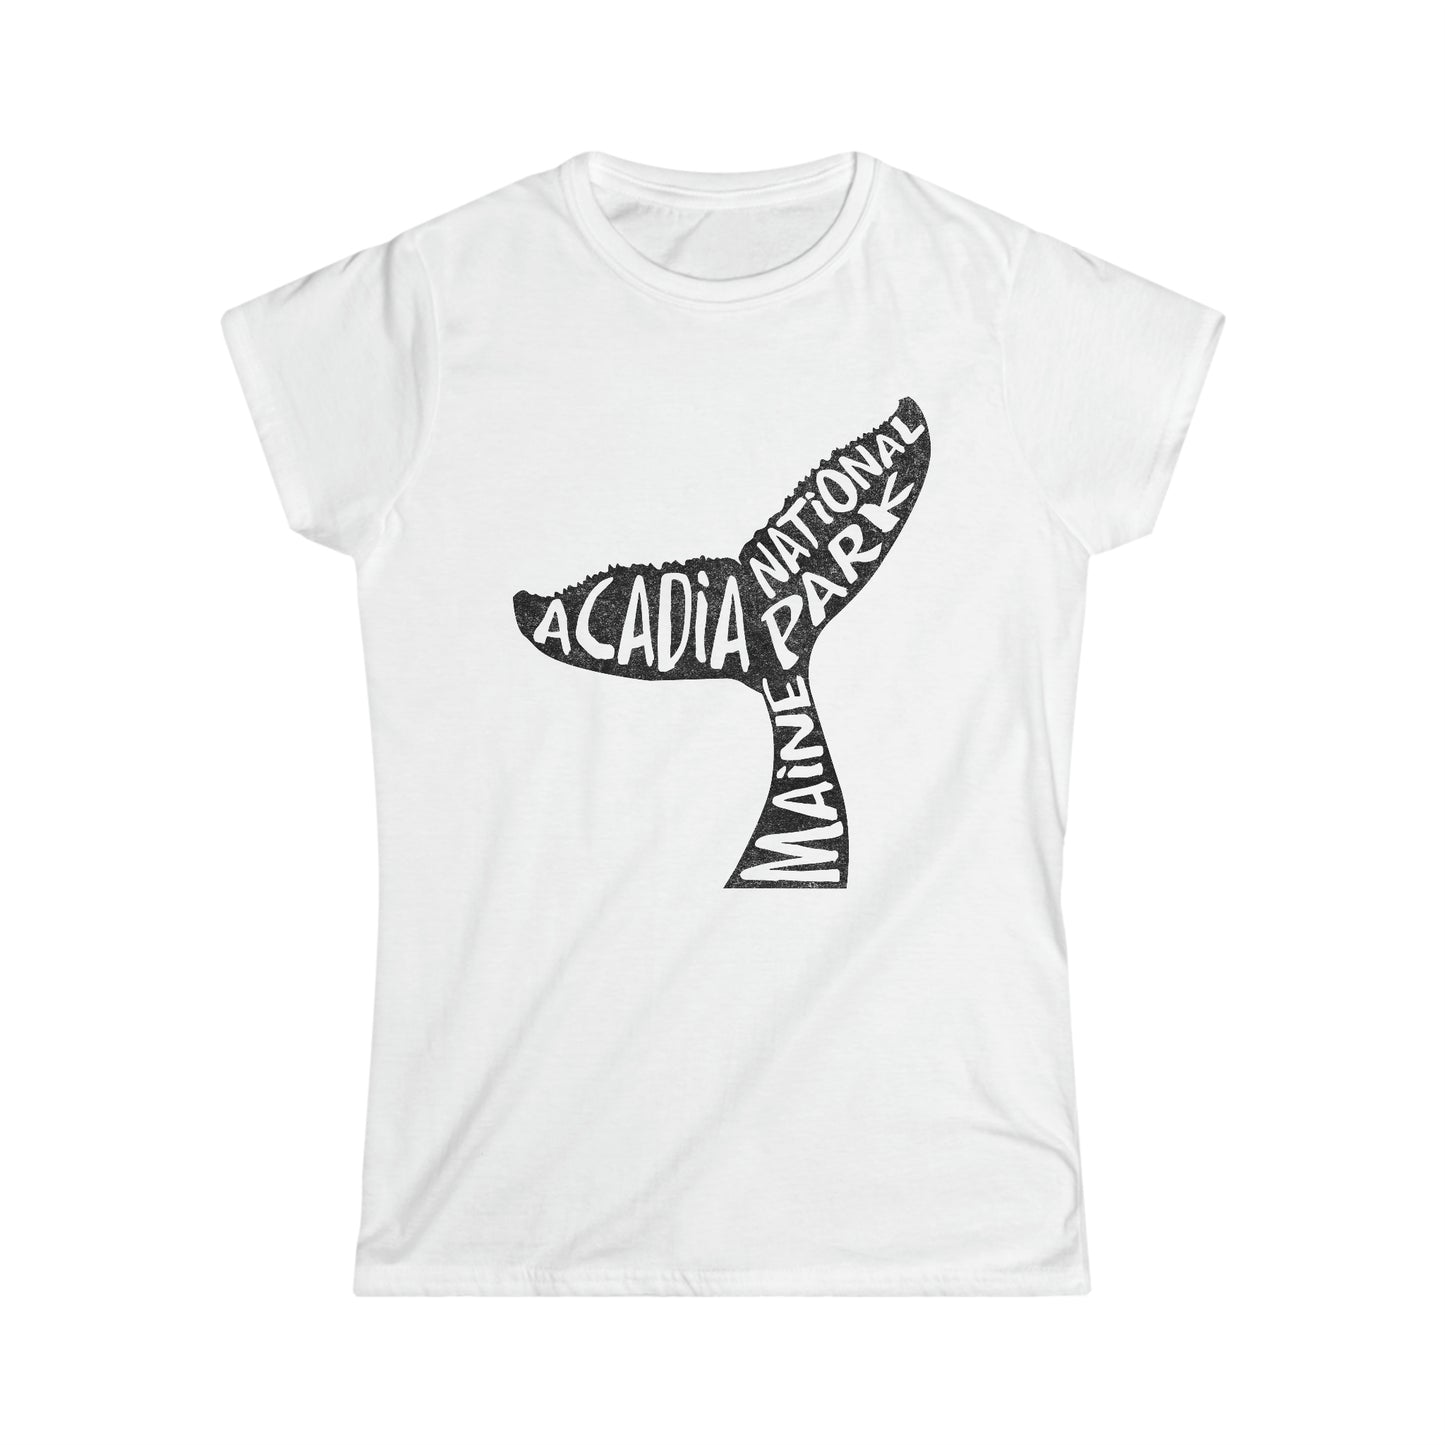 Acadia National Park Women's T-Shirt - Whale Tail